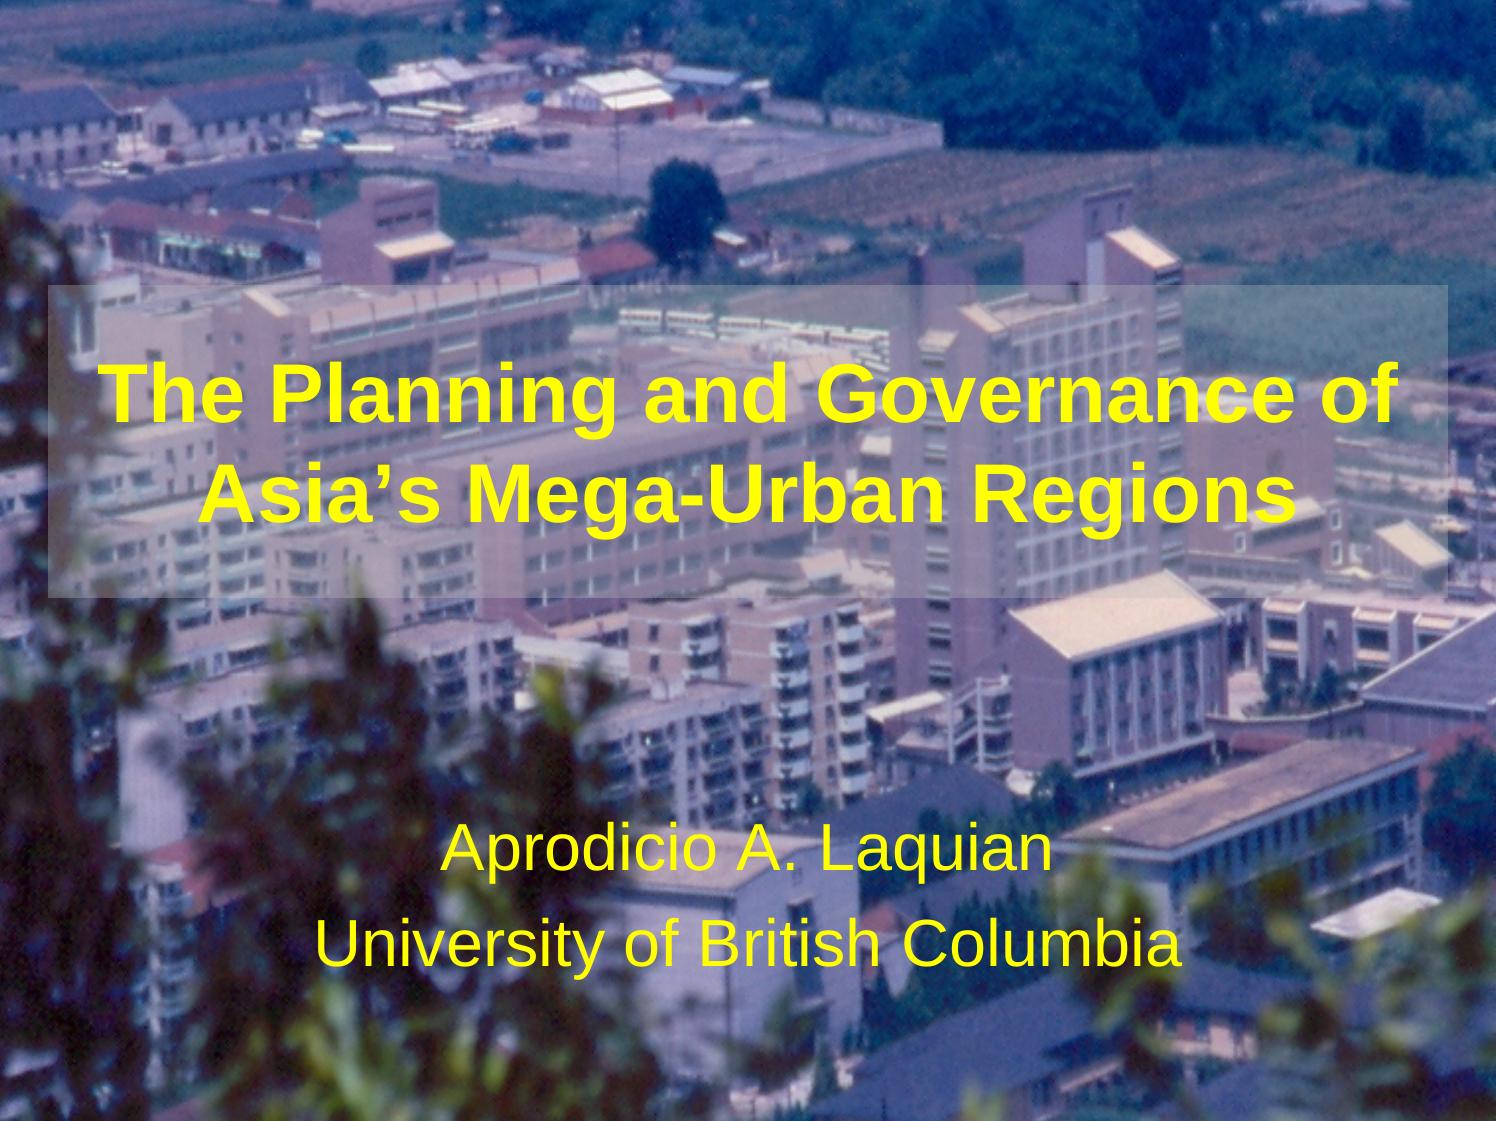 THE SUSTAINABILITY OF MEGA-URBAN REGIONS IN ASIA AND THE PACIFIC